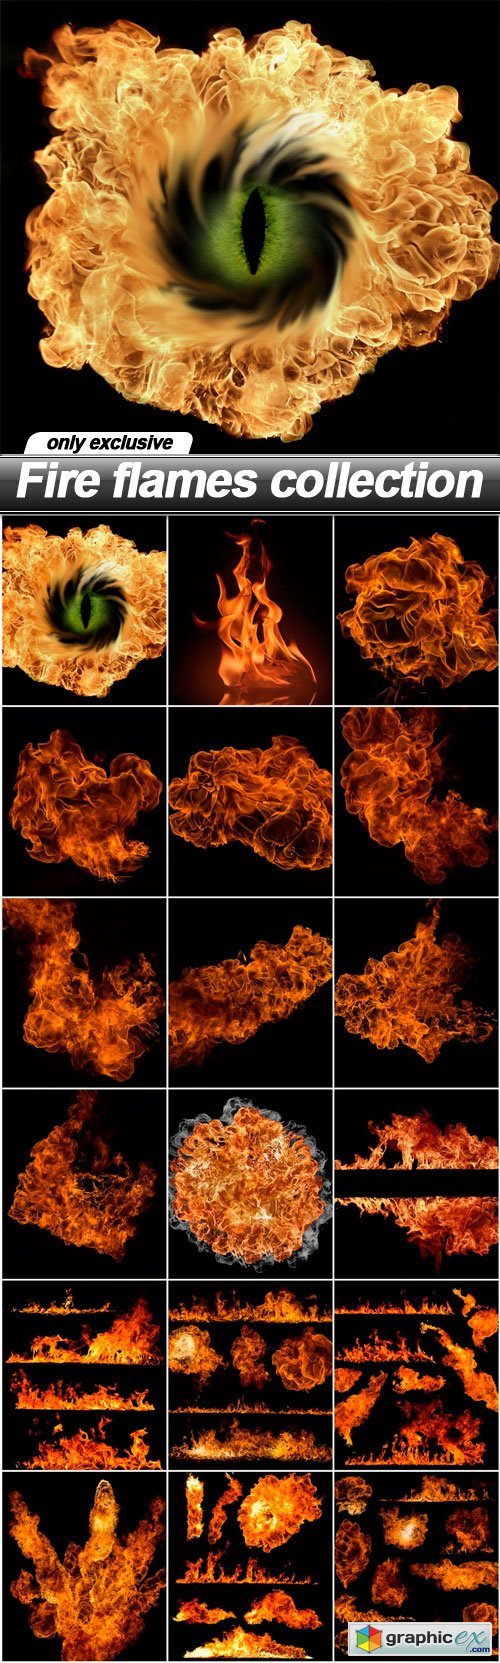 Fire flames collection - 18 UHQ JPEG